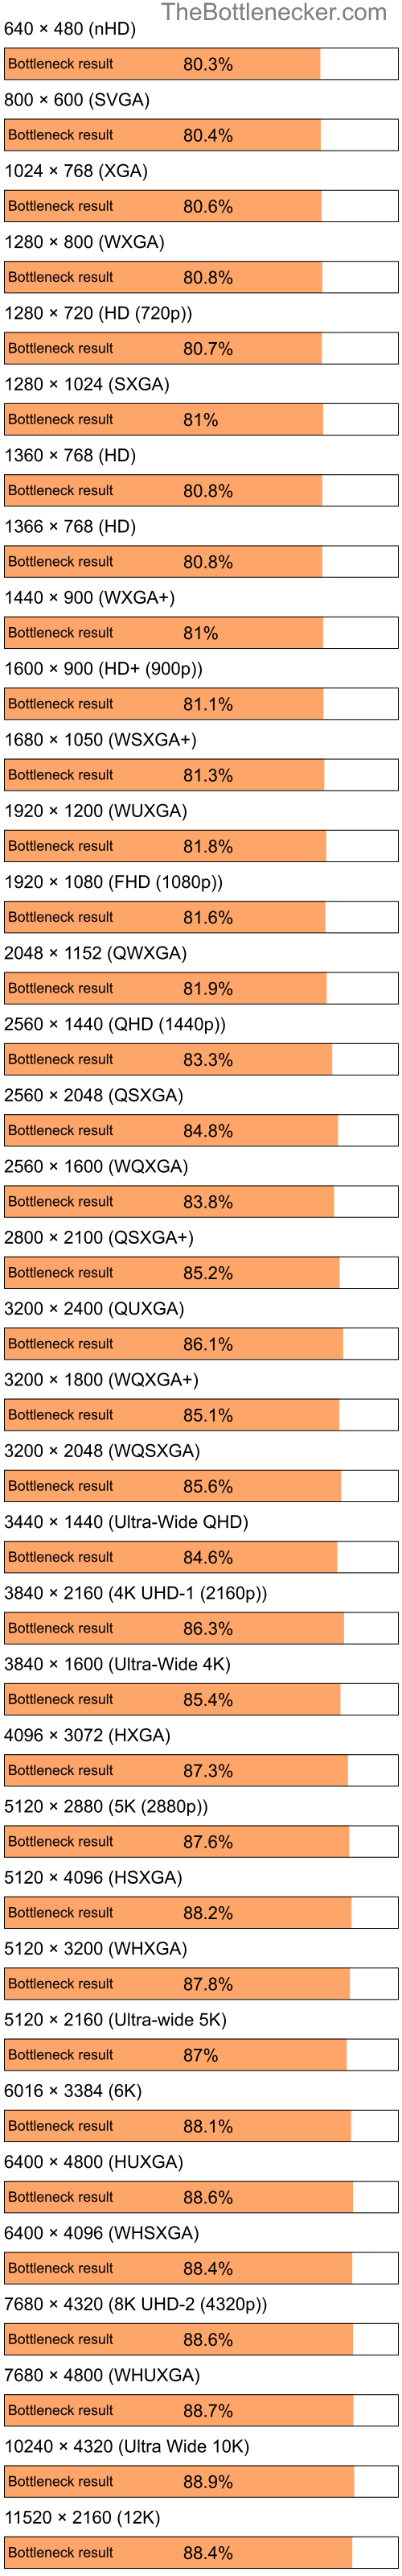 Bottleneck results by resolution for Intel Celeron and NVIDIA GeForce 6200 A-LE in Graphic Card Intense Tasks